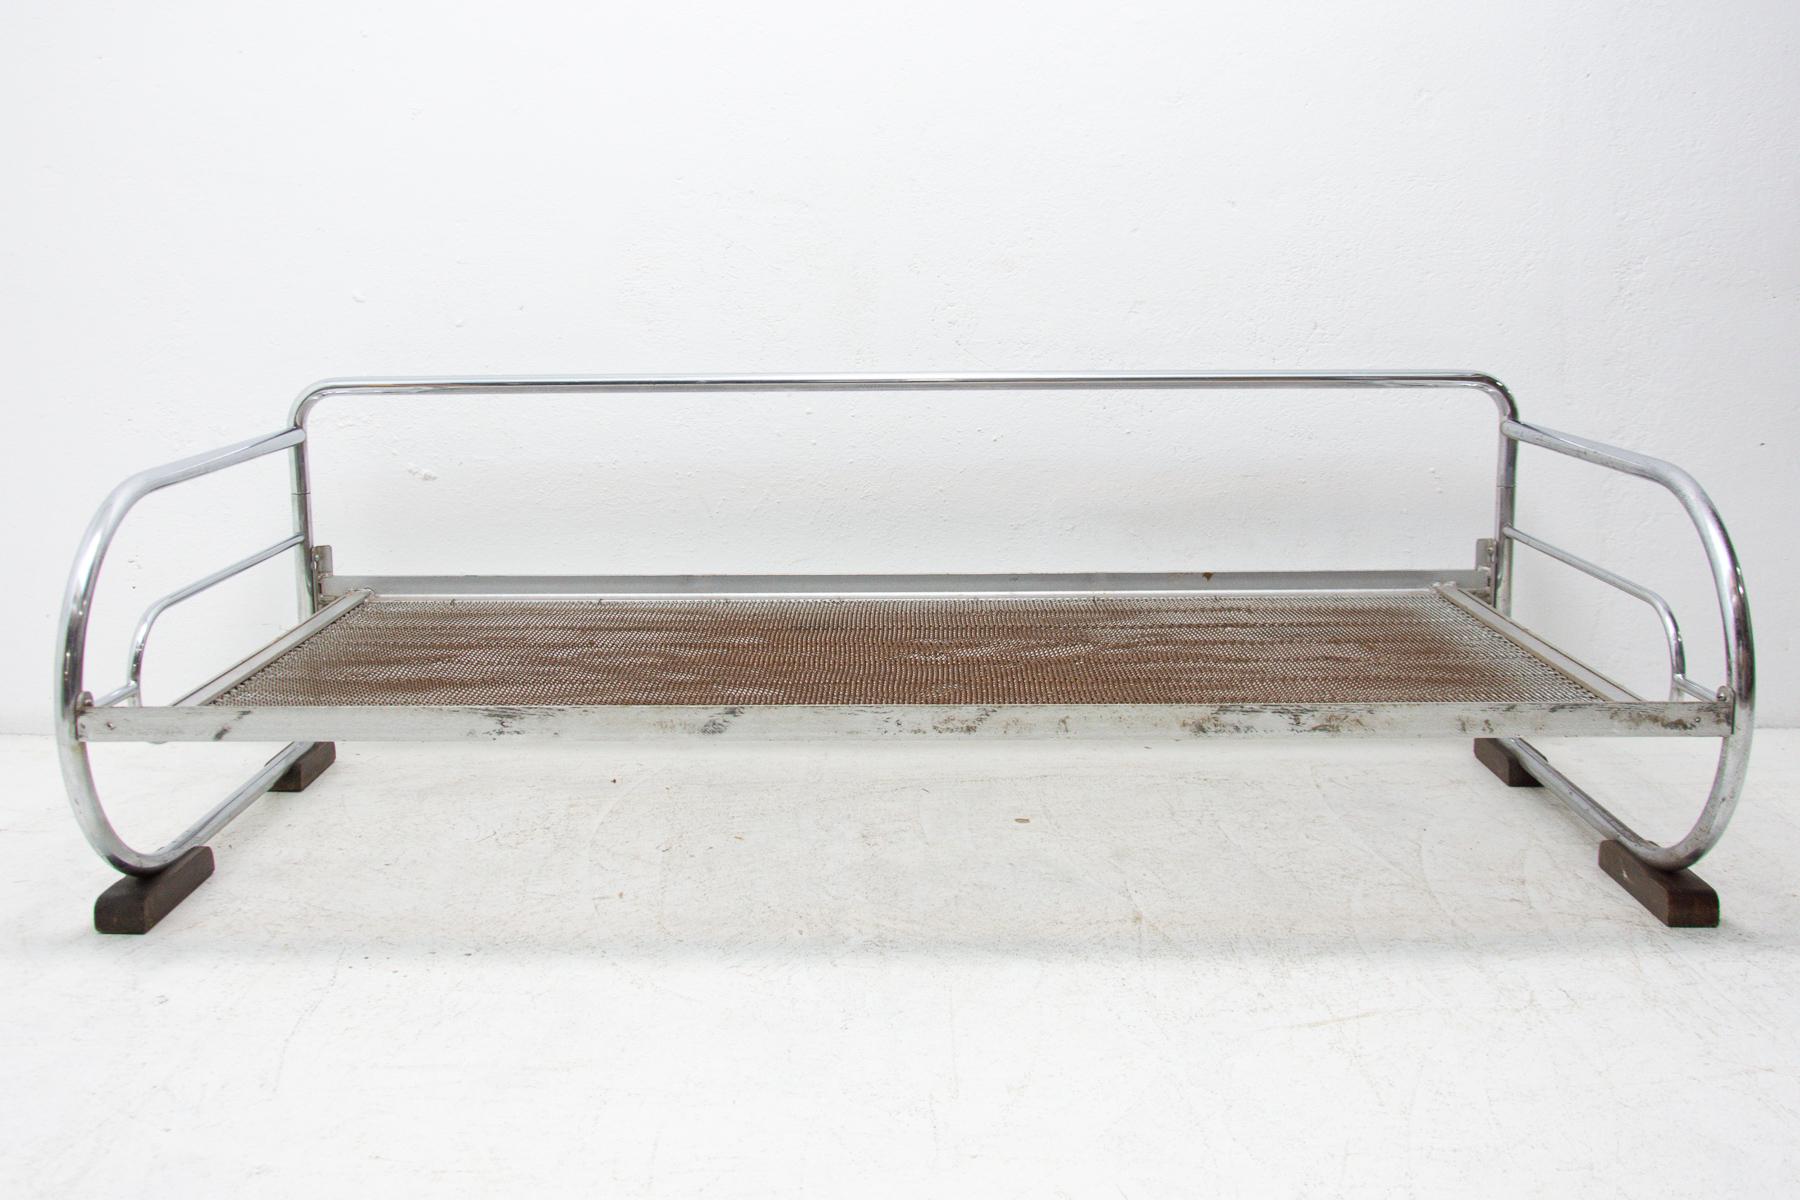 Chromed, tubular steel sofa from the Bauhaus period, 1930s, Bohemia. Made by Hynek Gottwald company. Chrome is in good vintage condition, showing slight signs of aging and using.
It has four wooden legs
Seat height 28 cm.